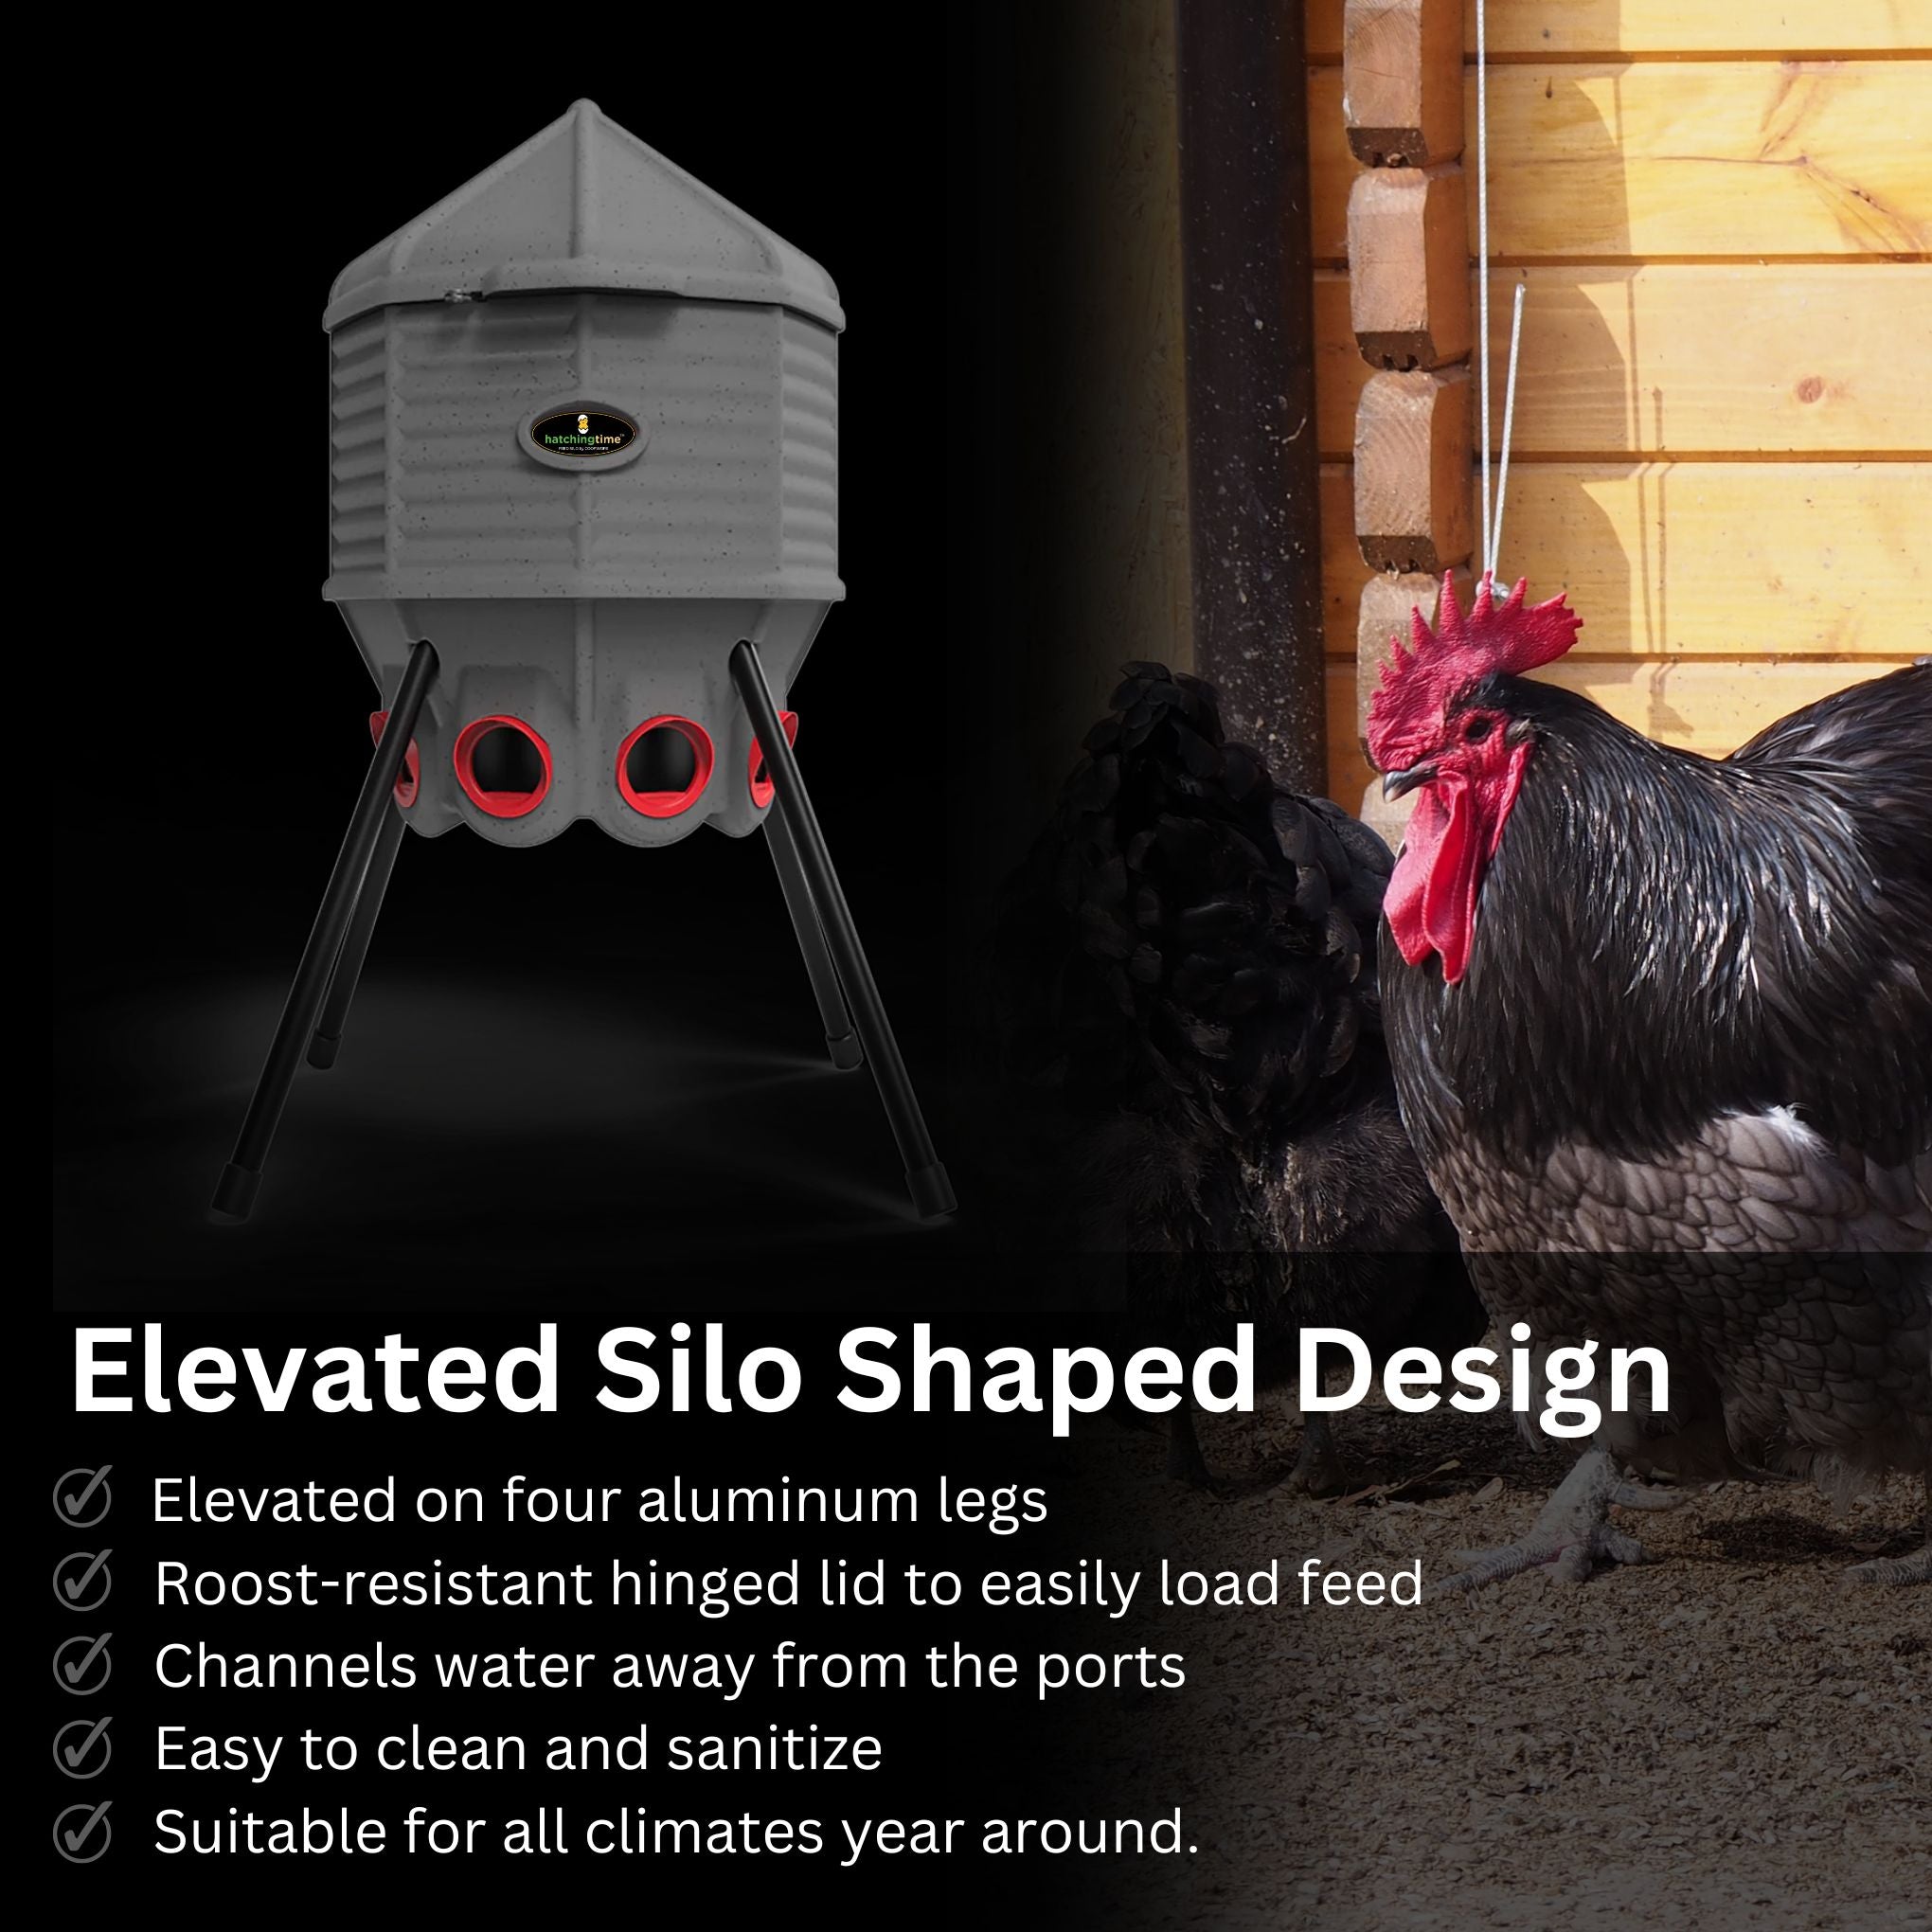 Hatching Time Feed Silo 80 Lb Feeder CoopWorx CWFS-80-A4 Silo Design Patent Pending. Image shows an elevated silo design with 4 aluminum legs, easy to load top, and an easy to clean design.